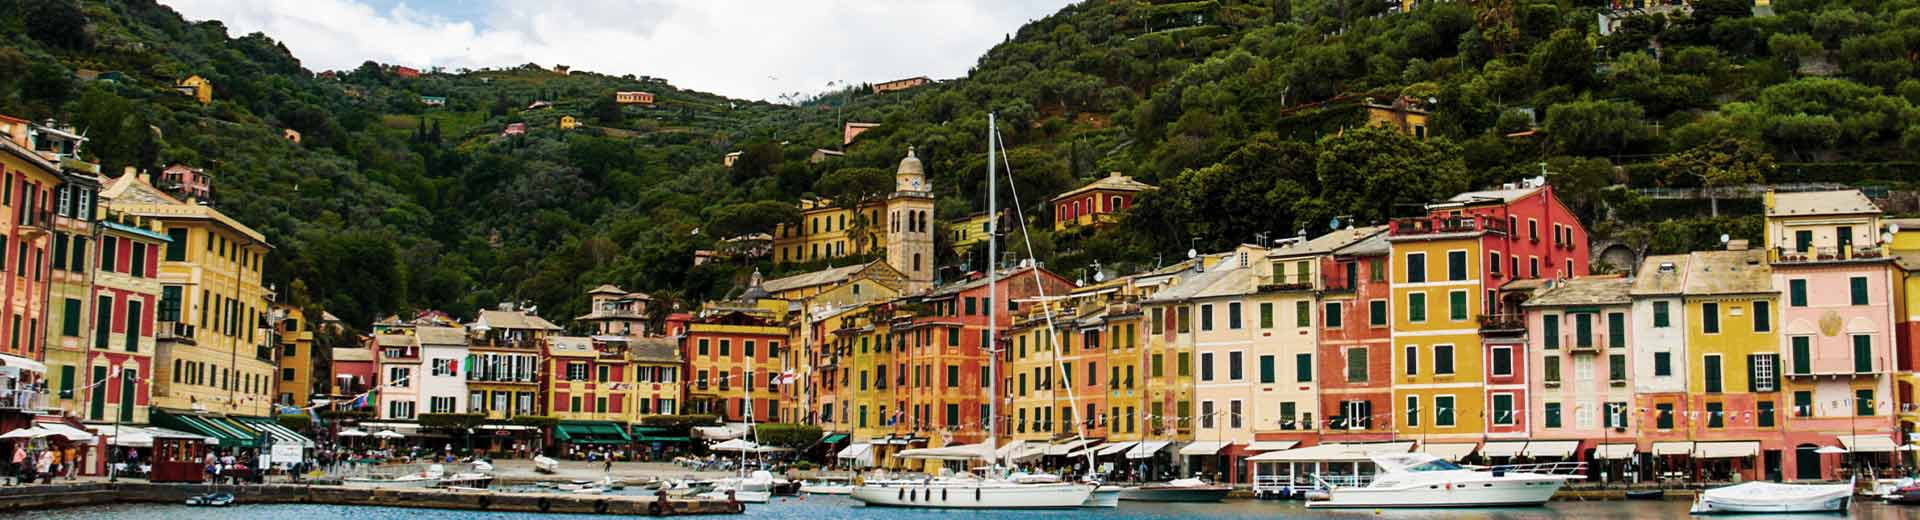 The beautiful and colorful buildings of Genoa stretched along the waterfront.